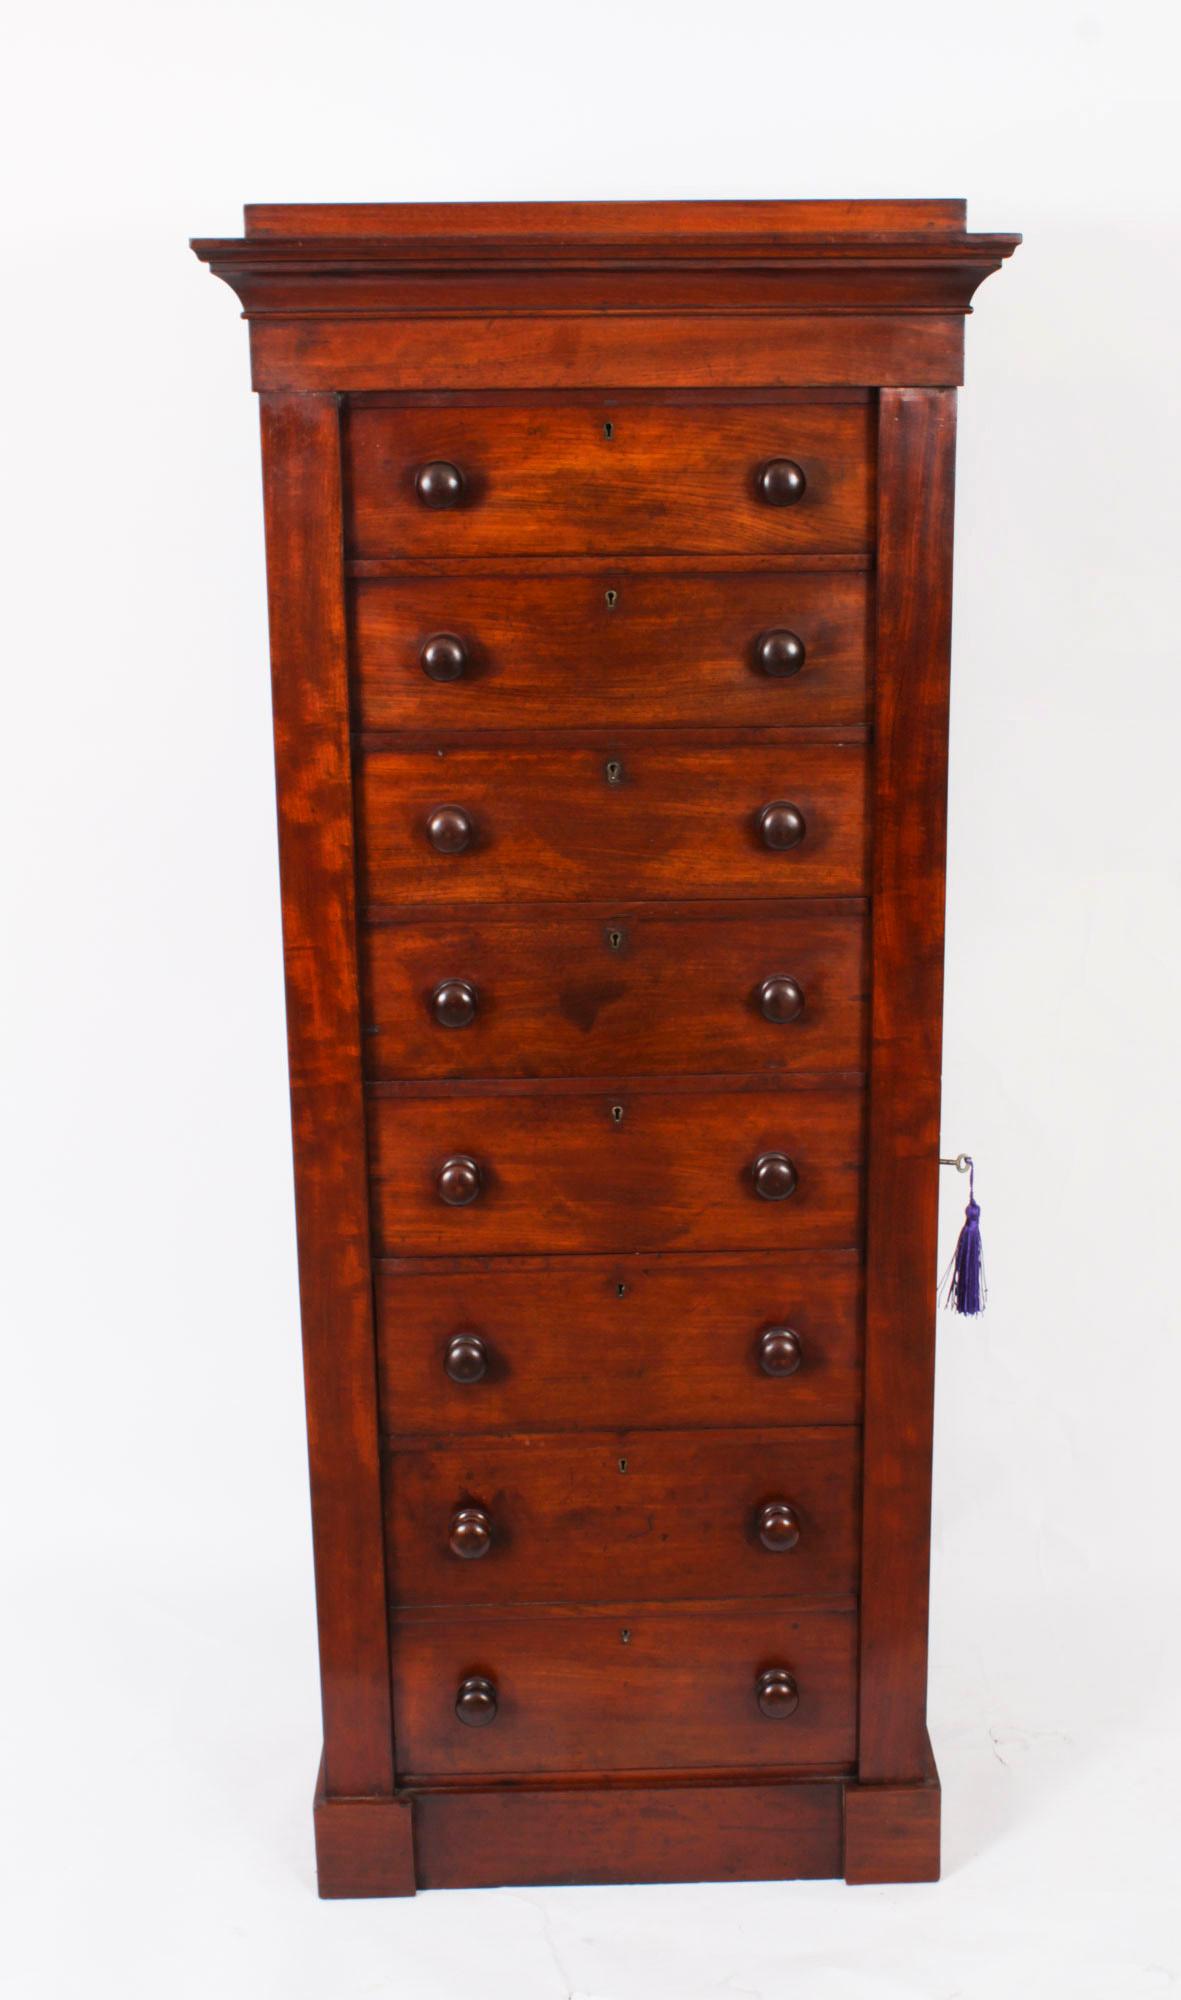 A fine antique well proportioned flame mahogany George IV Wellington chest, in the manner of Gillows, Circa 1830 in date.

With fabulous original colour, original handles, ash and cedar lined drawers and key for the locking bar.

It has has seven